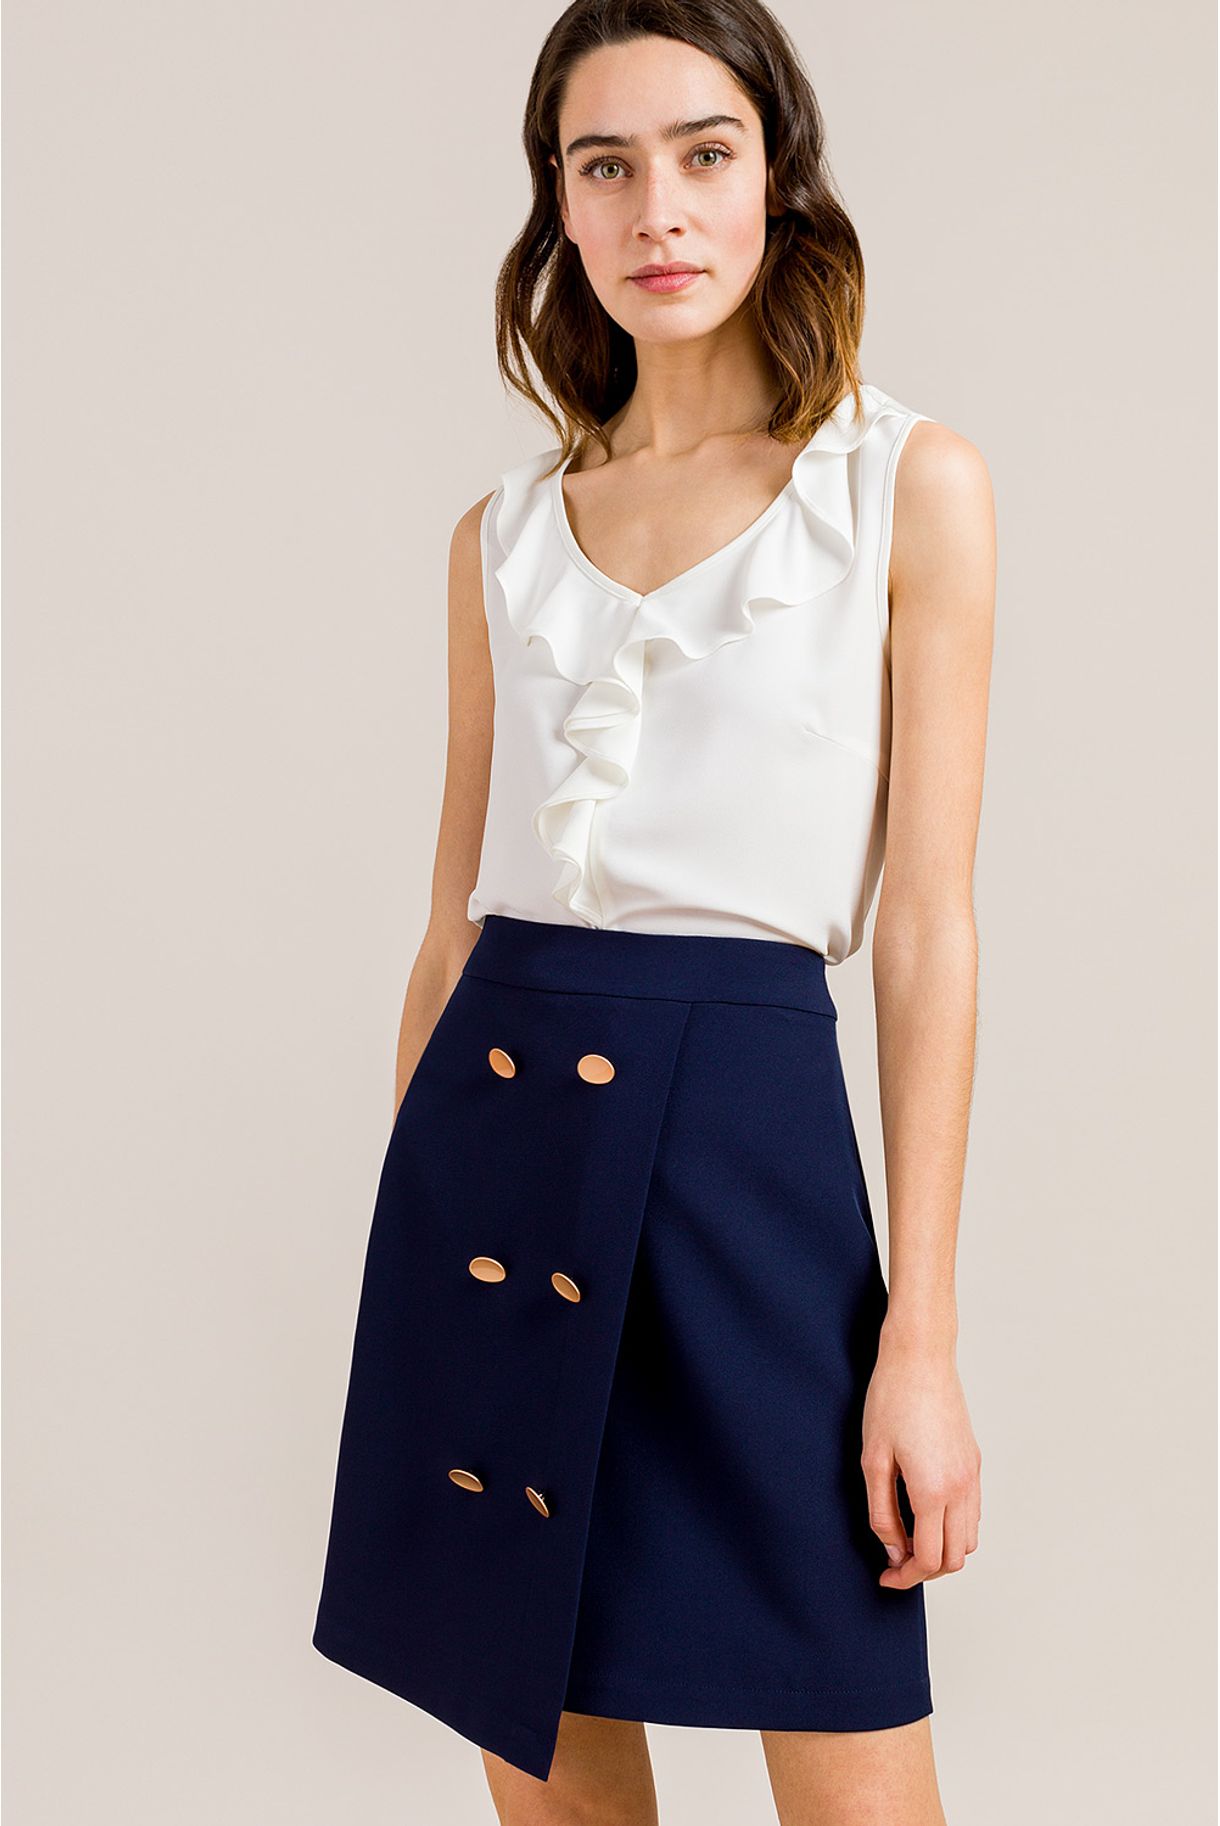 Short Skirt With Gold Buttons